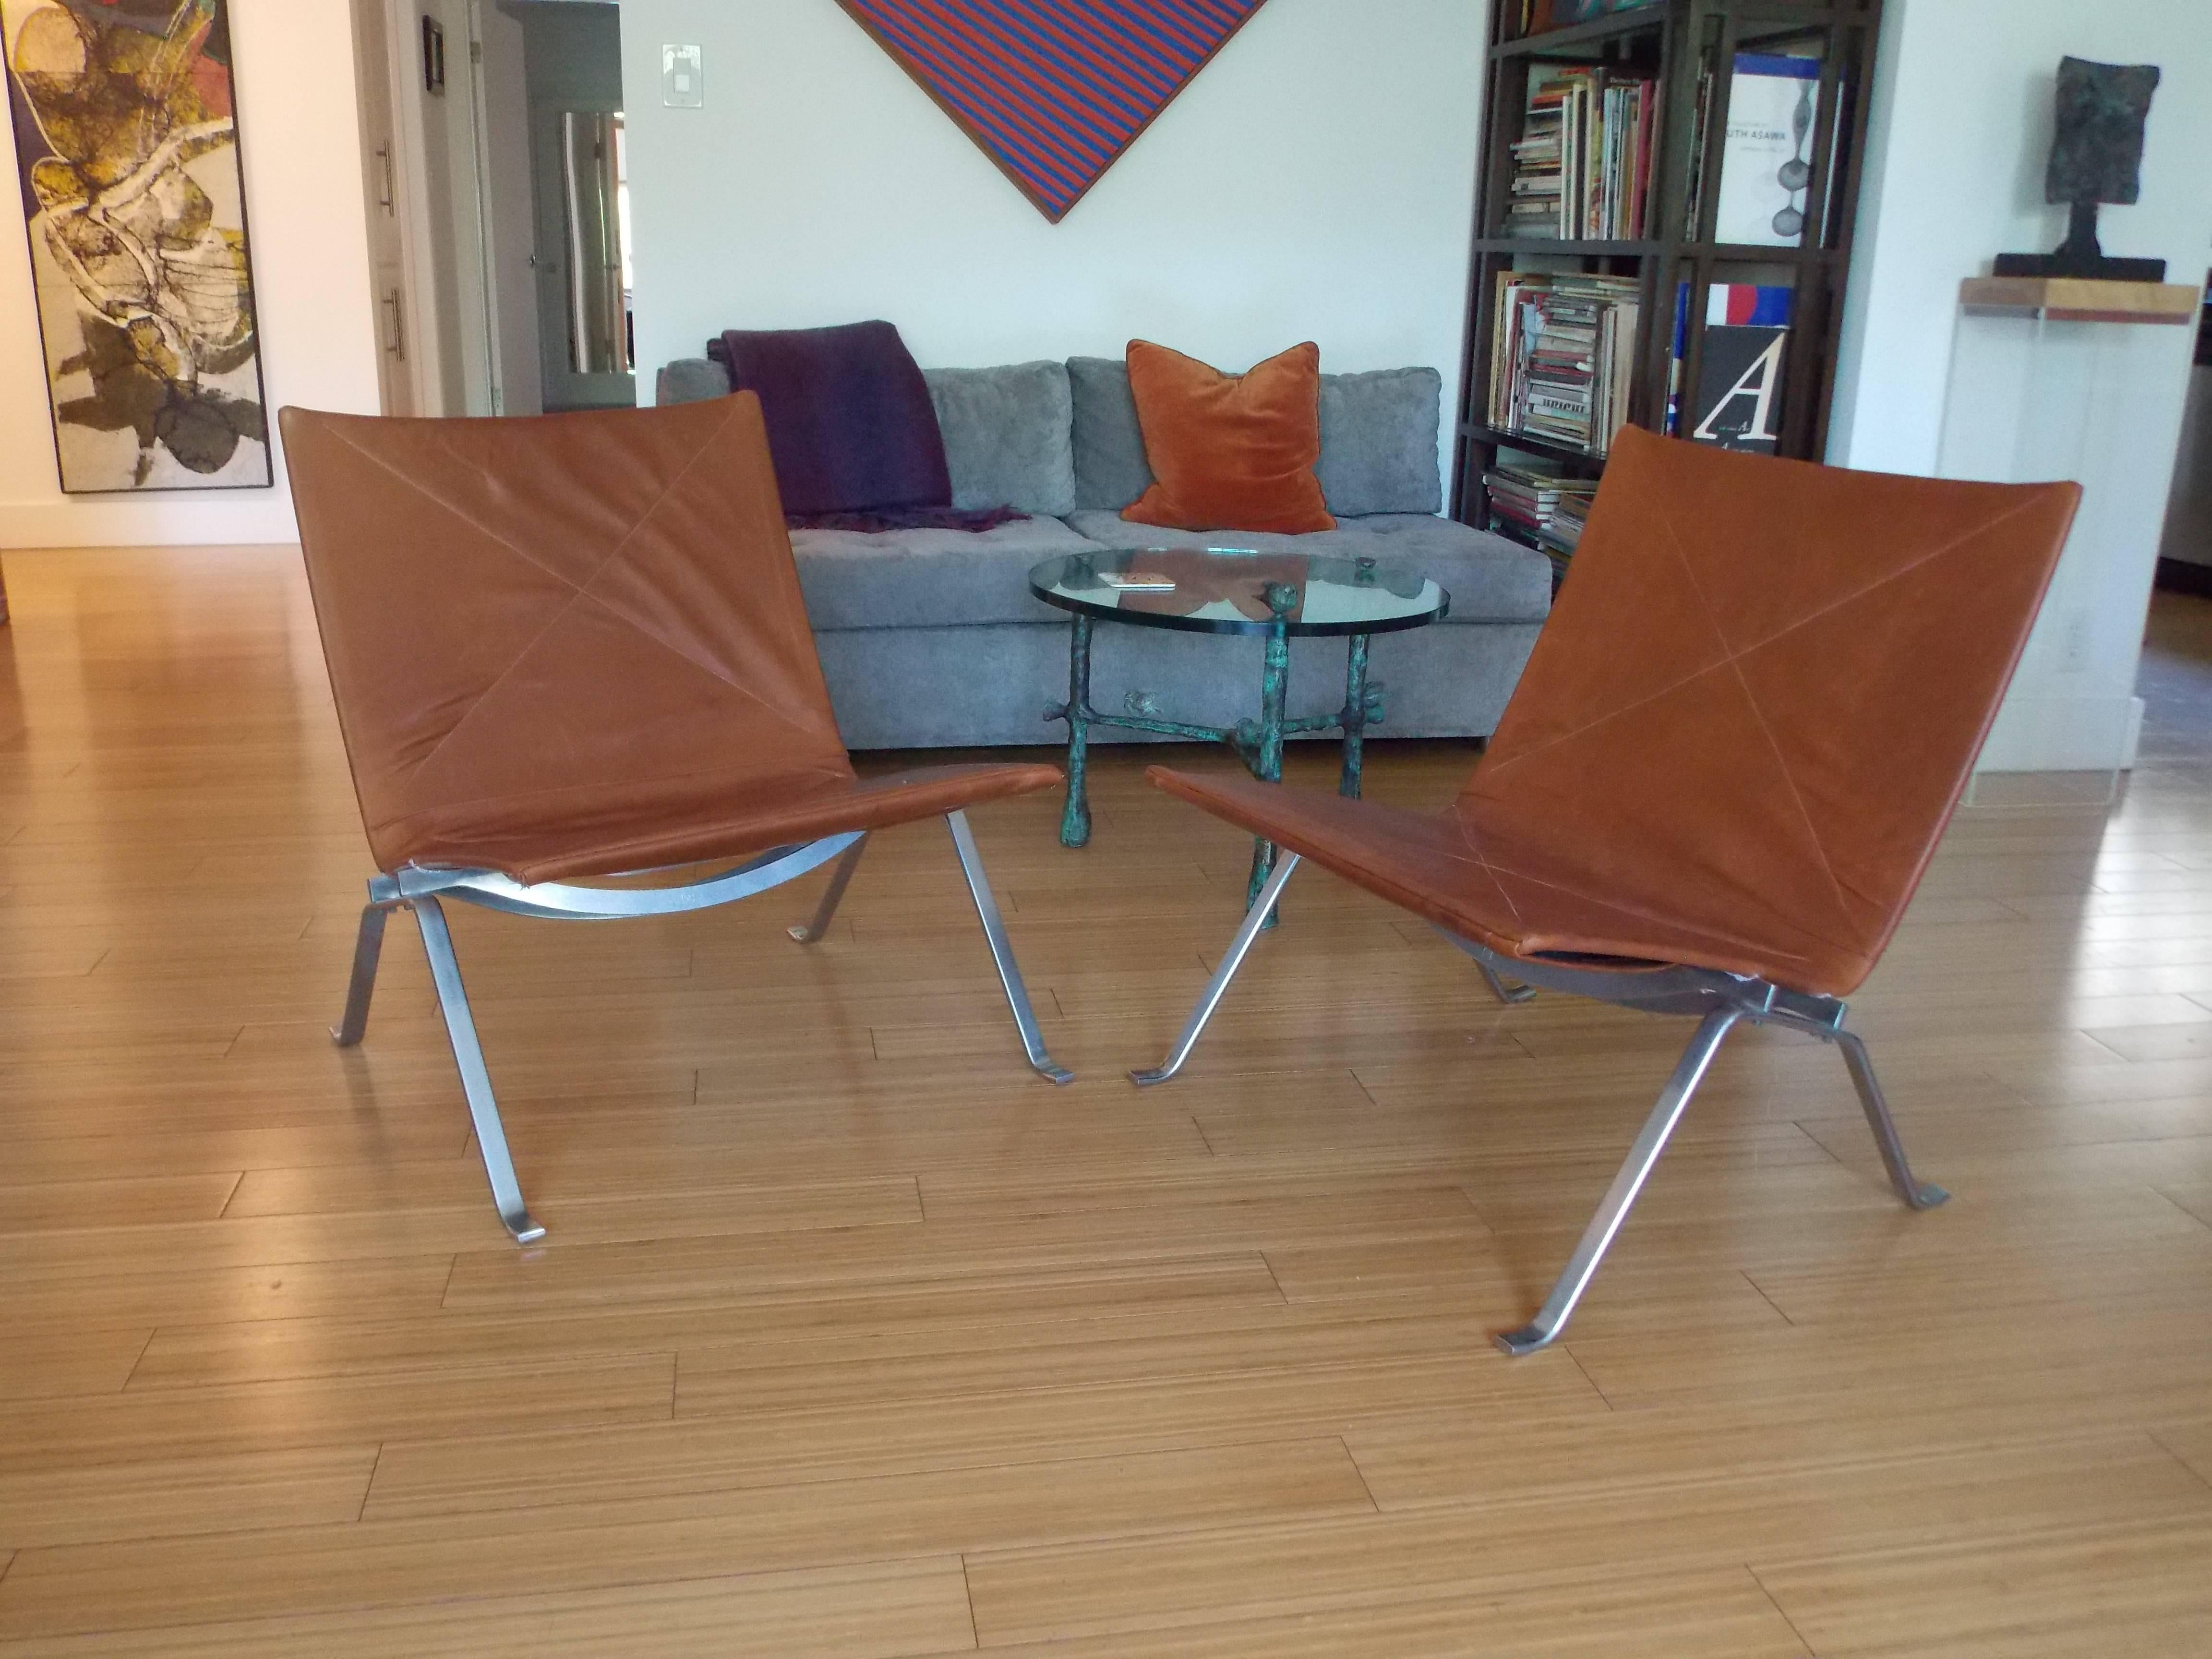 A handsome pair of modernist designs. 
The leather shows a bit of distress with a nice burnt sienna color.
The base is made of chrome plated steel.
One of the bases has some plating loss at the feet and pitting.
These chairs are still sturdy and